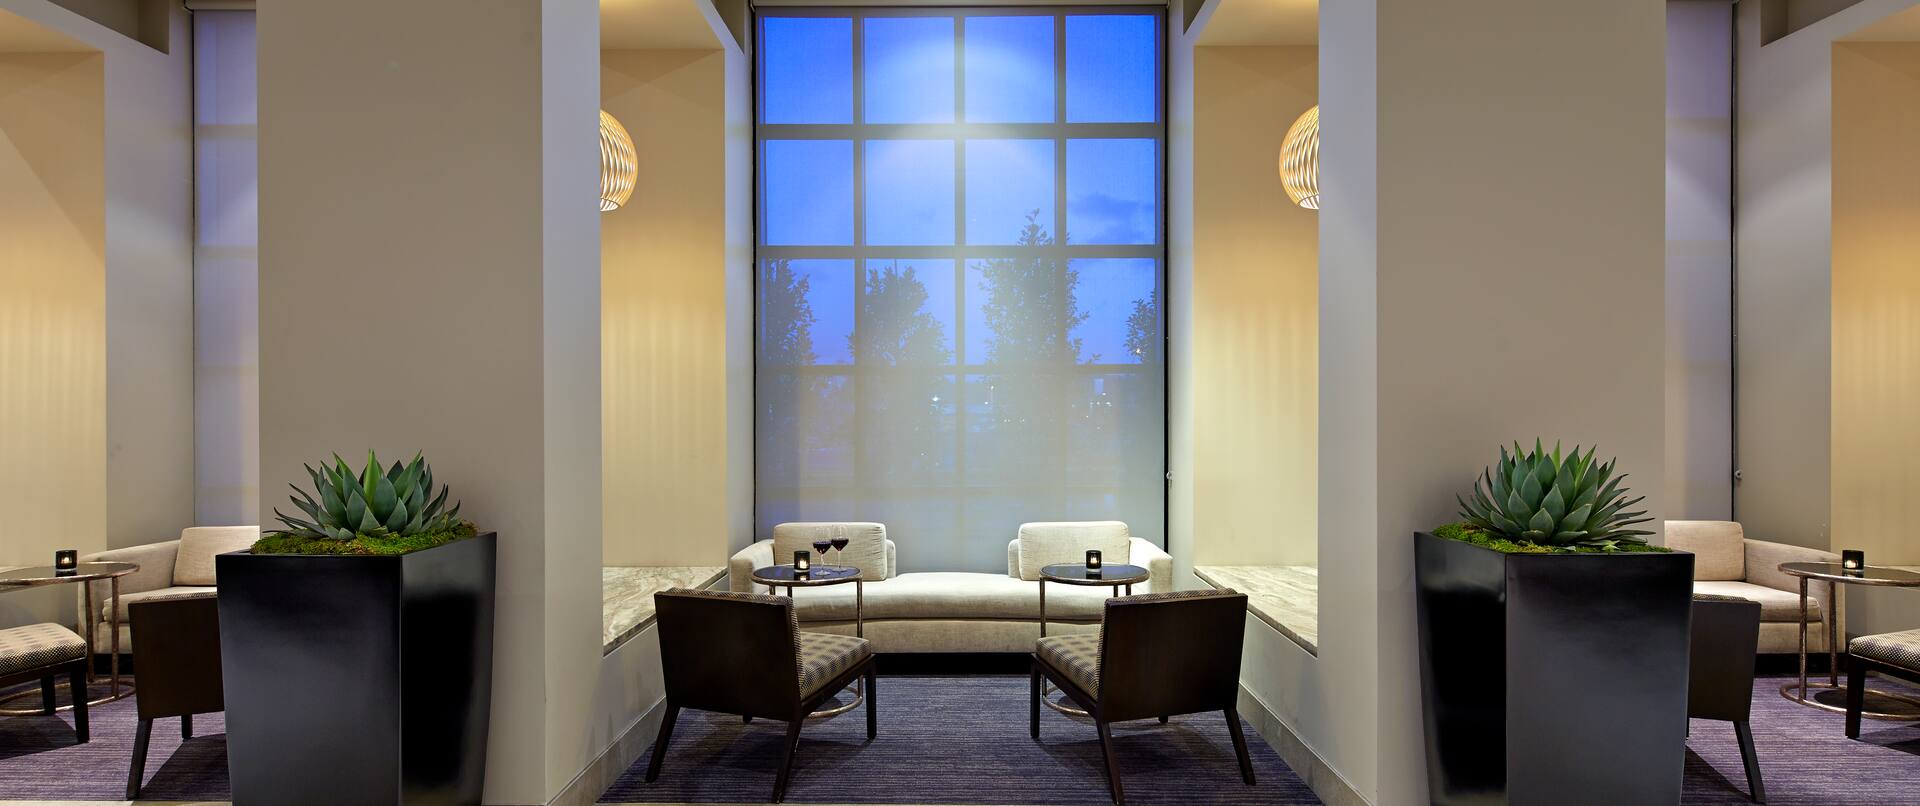 Lounge Area in Lobby